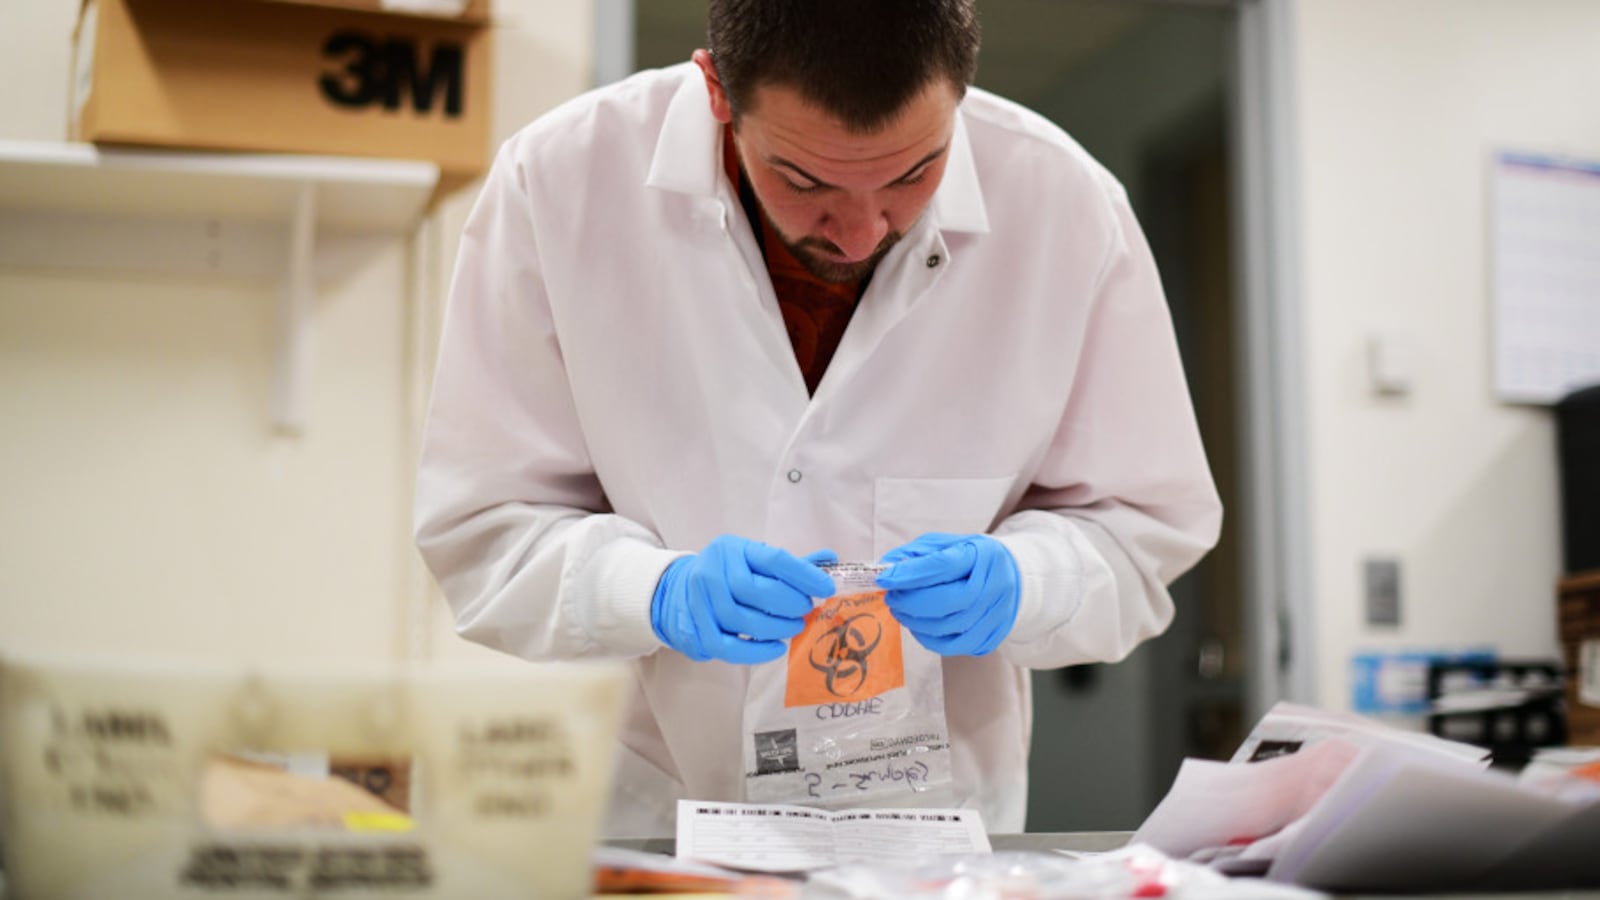 David Storey processes the samples for COVID-19 test at Colorado Department of Public Health and Environment Laboratory Services Division in Denver, Colorado on Saturday. March 14, 2020.